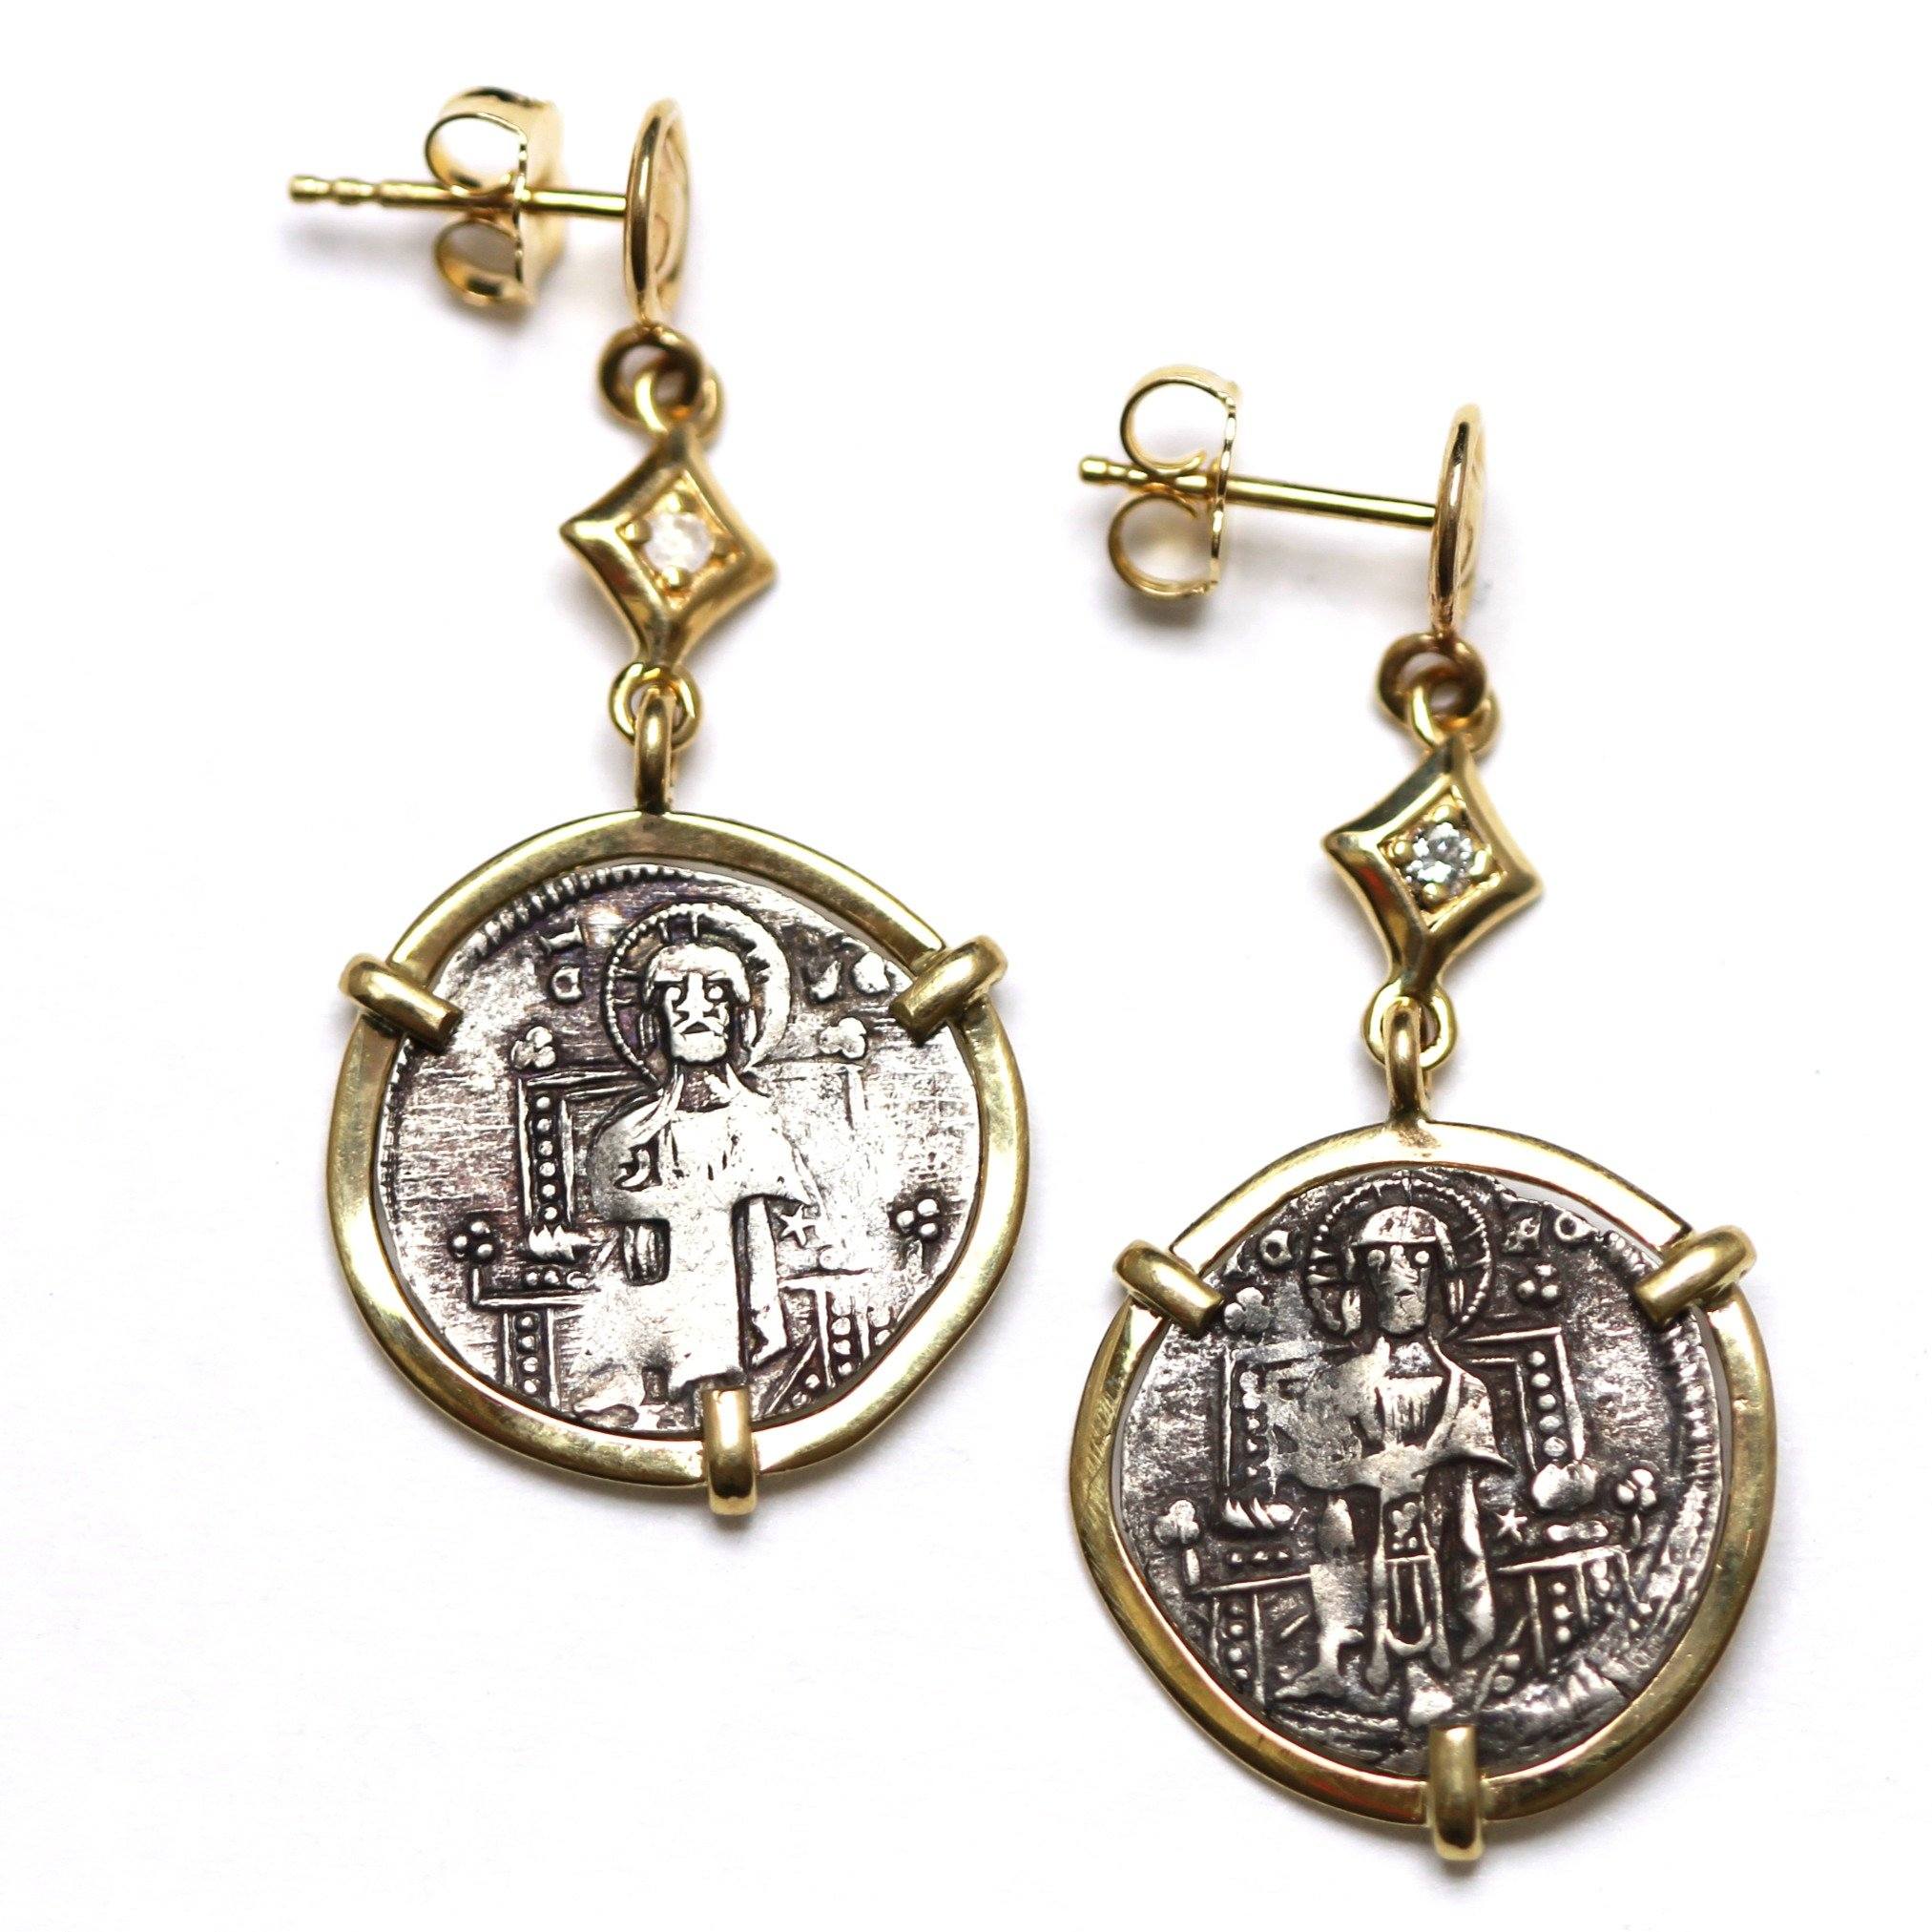 14K Gold Earrings, 0.08 CT Diamond Accents, Venetian Grosso, Ancient Coin Earrings, ID13000 - Erez Ancient Coin Jewelry 